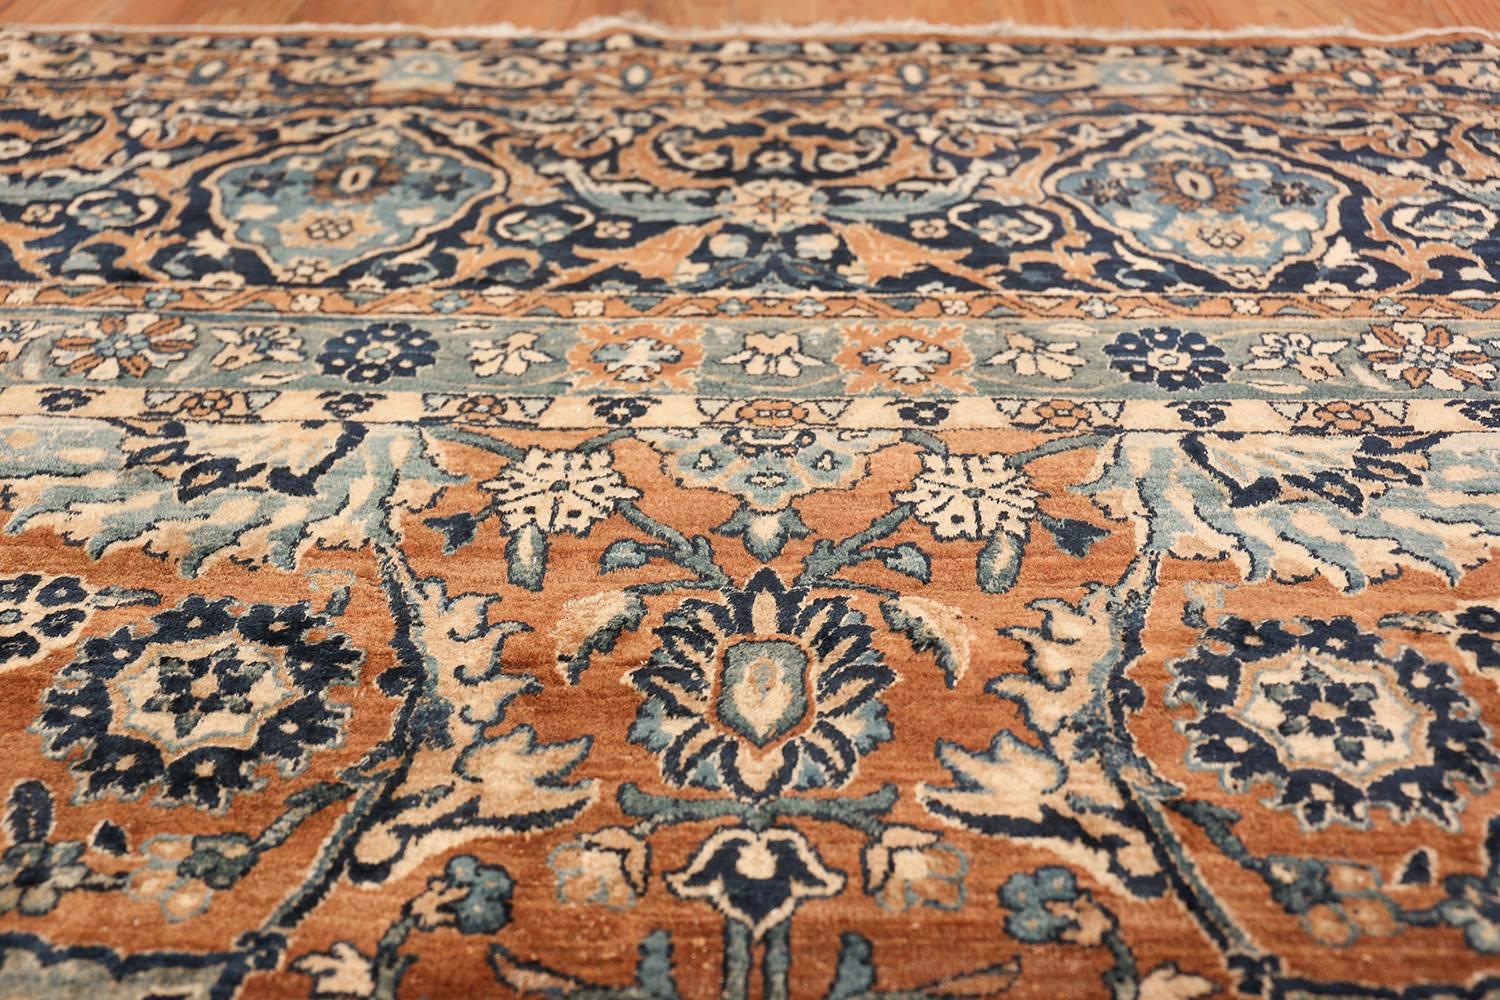 Hand-Knotted Beautiful Earth-Tone Oversized Antique Persian Kerman Carpet